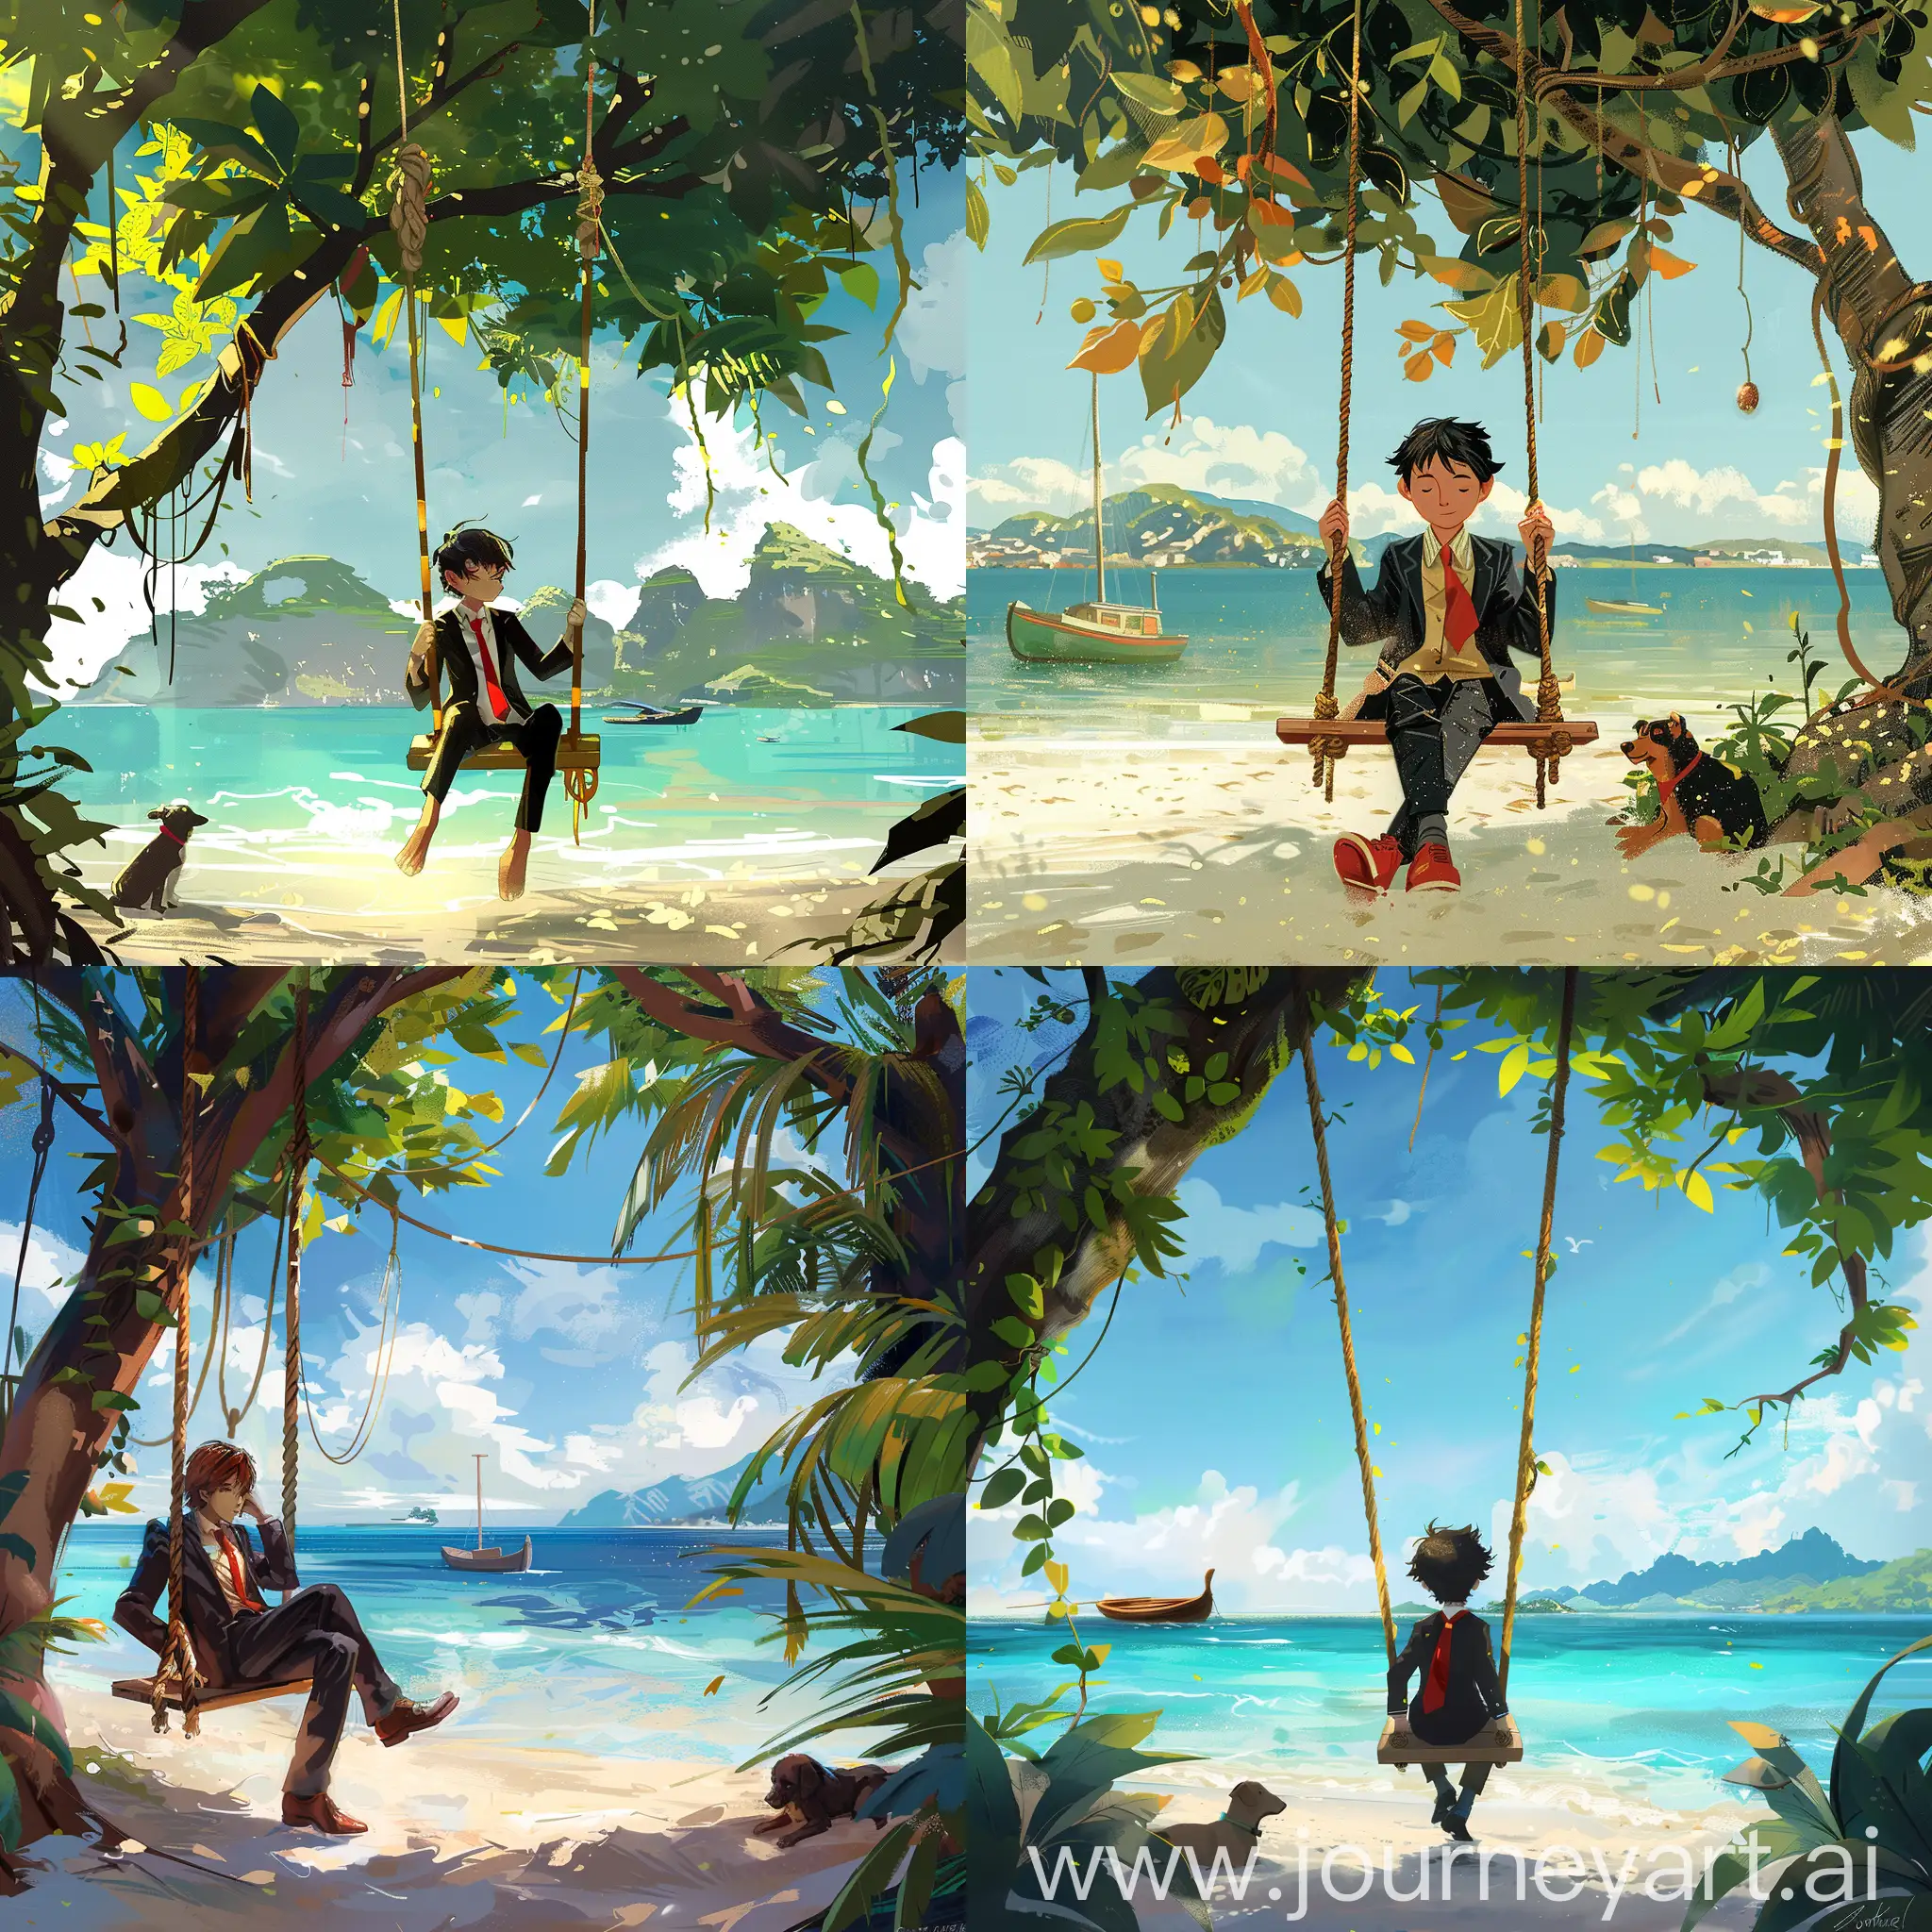 Young-Man-in-Tropical-Suit-on-Swing-with-Caribbean-Seascape